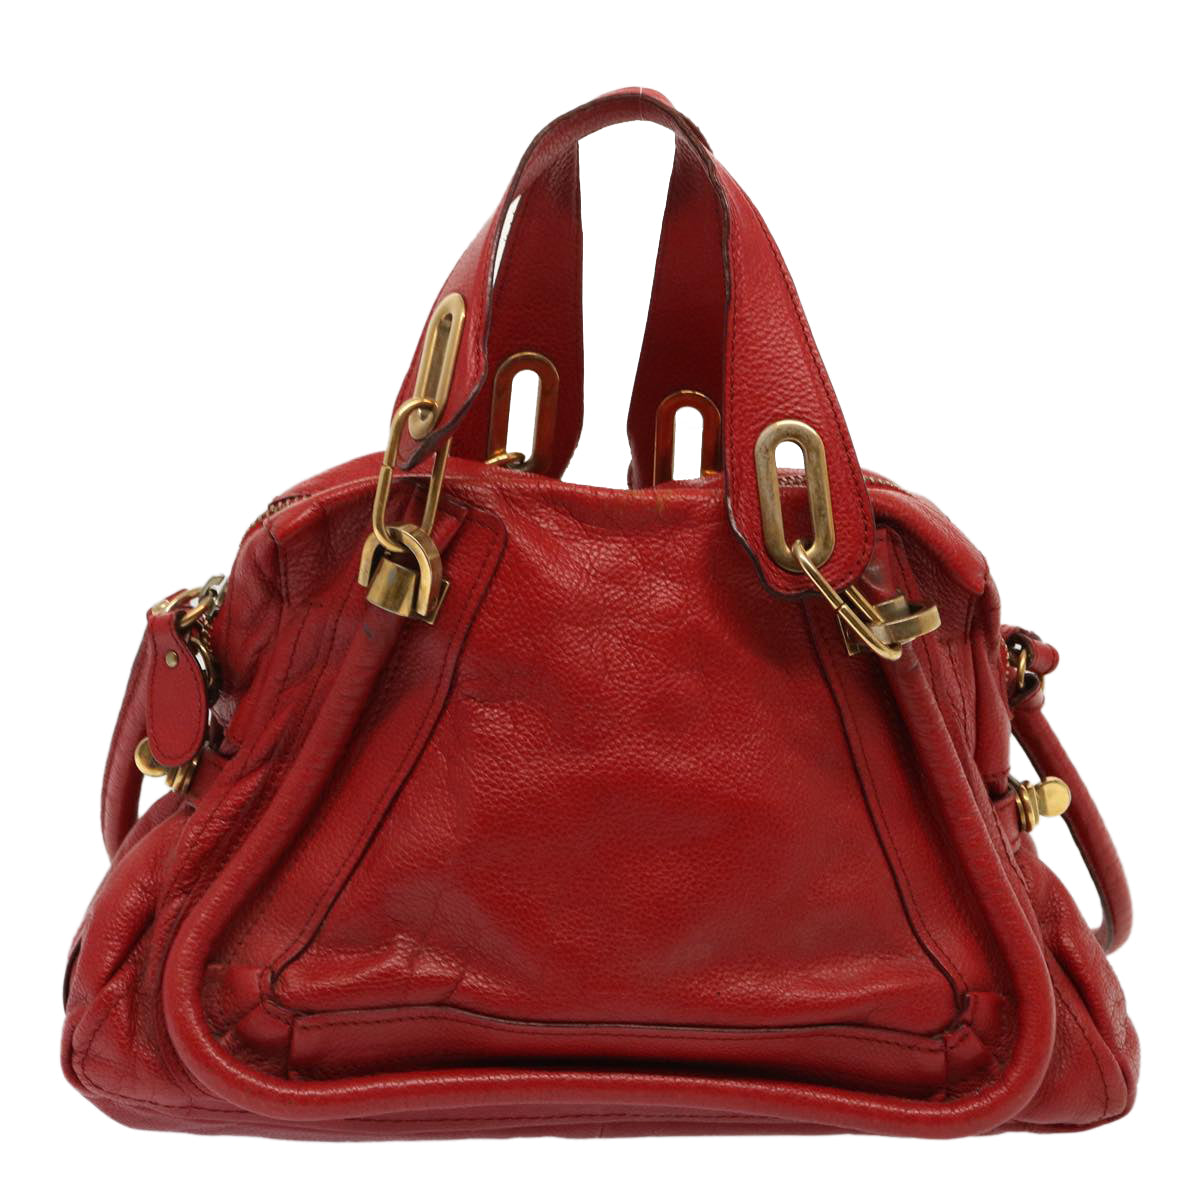 Chloe Paraty Hand Bag Leather 2way Red Auth 72667